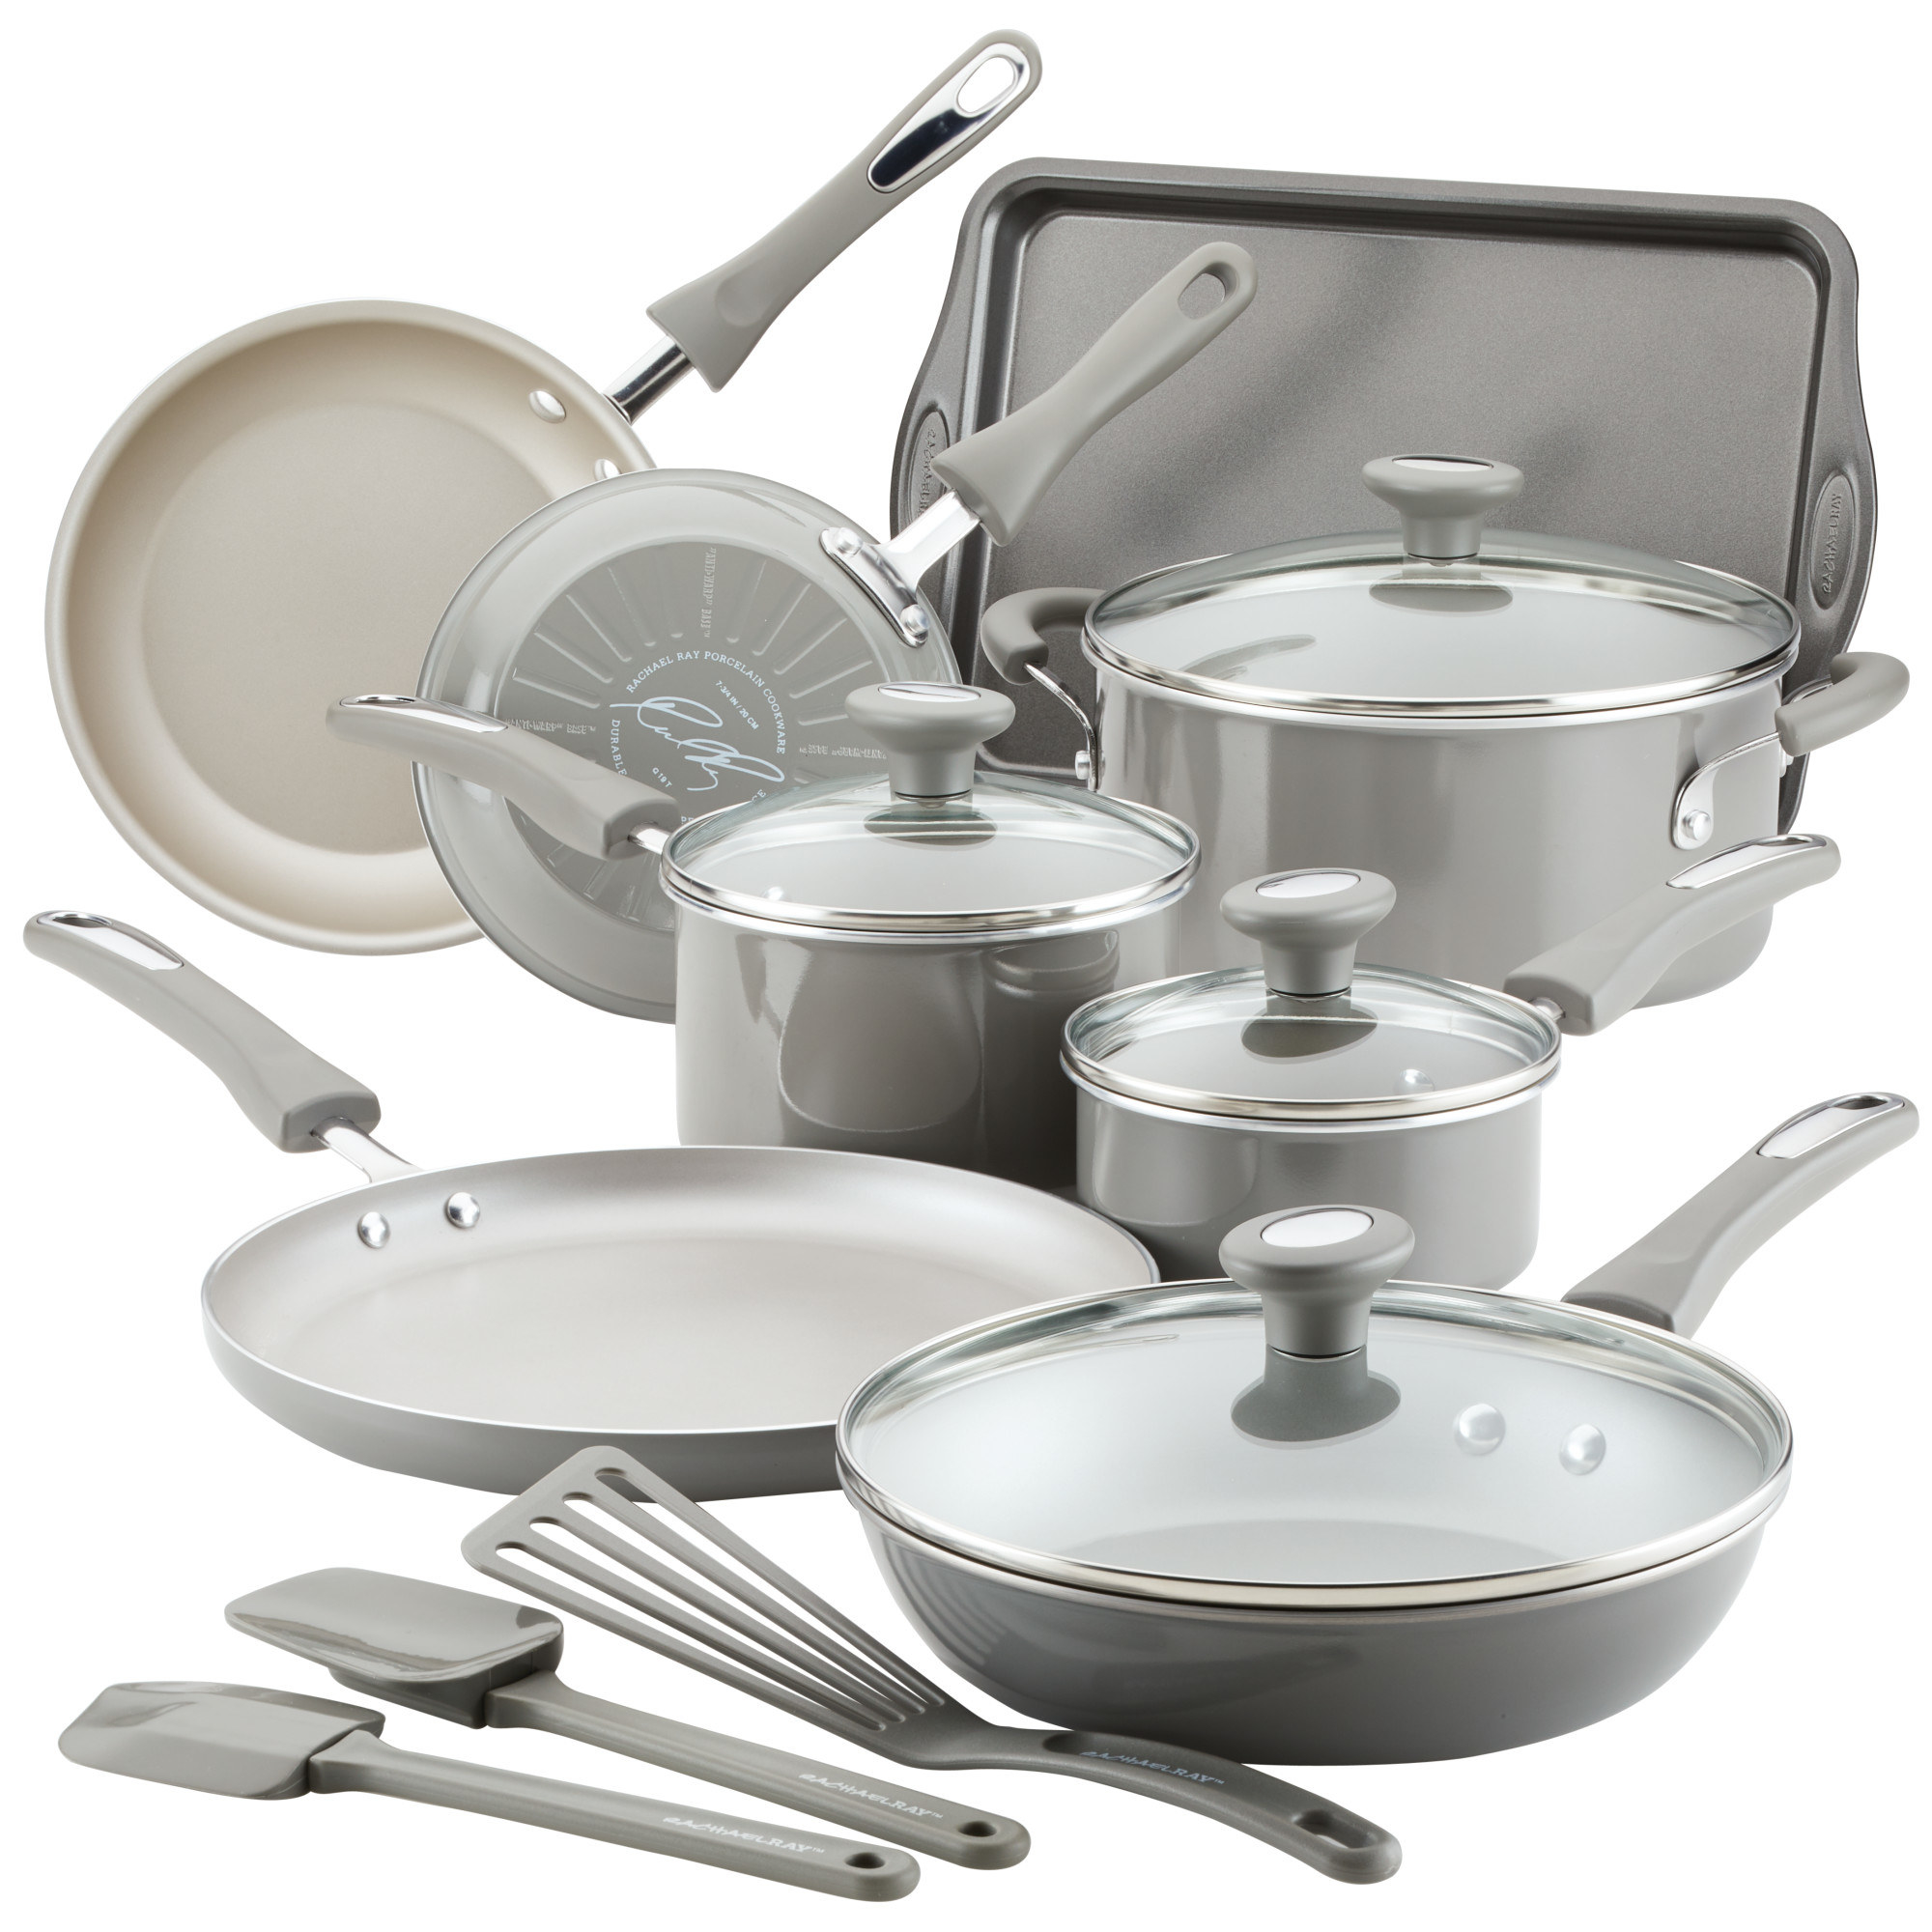 The silver cookware set